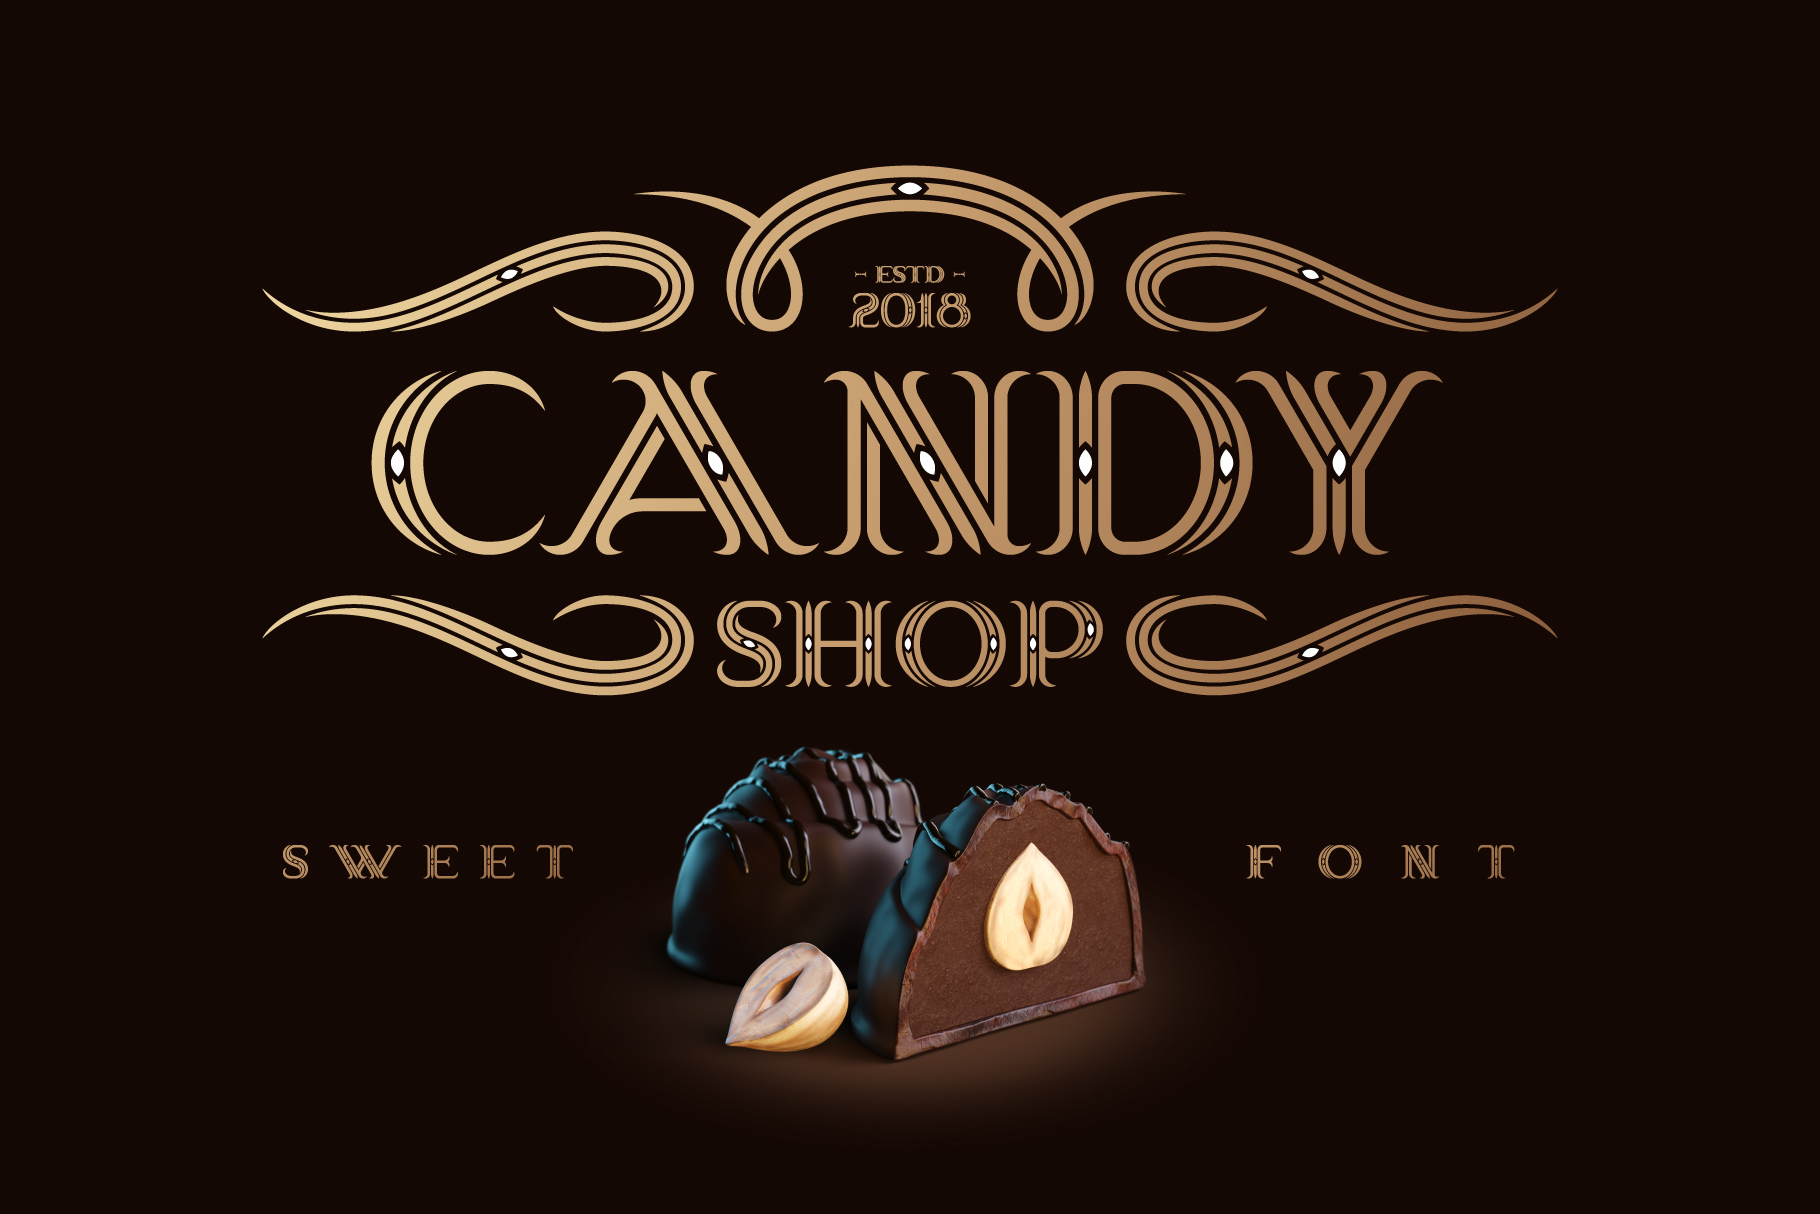 Facebook collage image with Candy Shop Font.